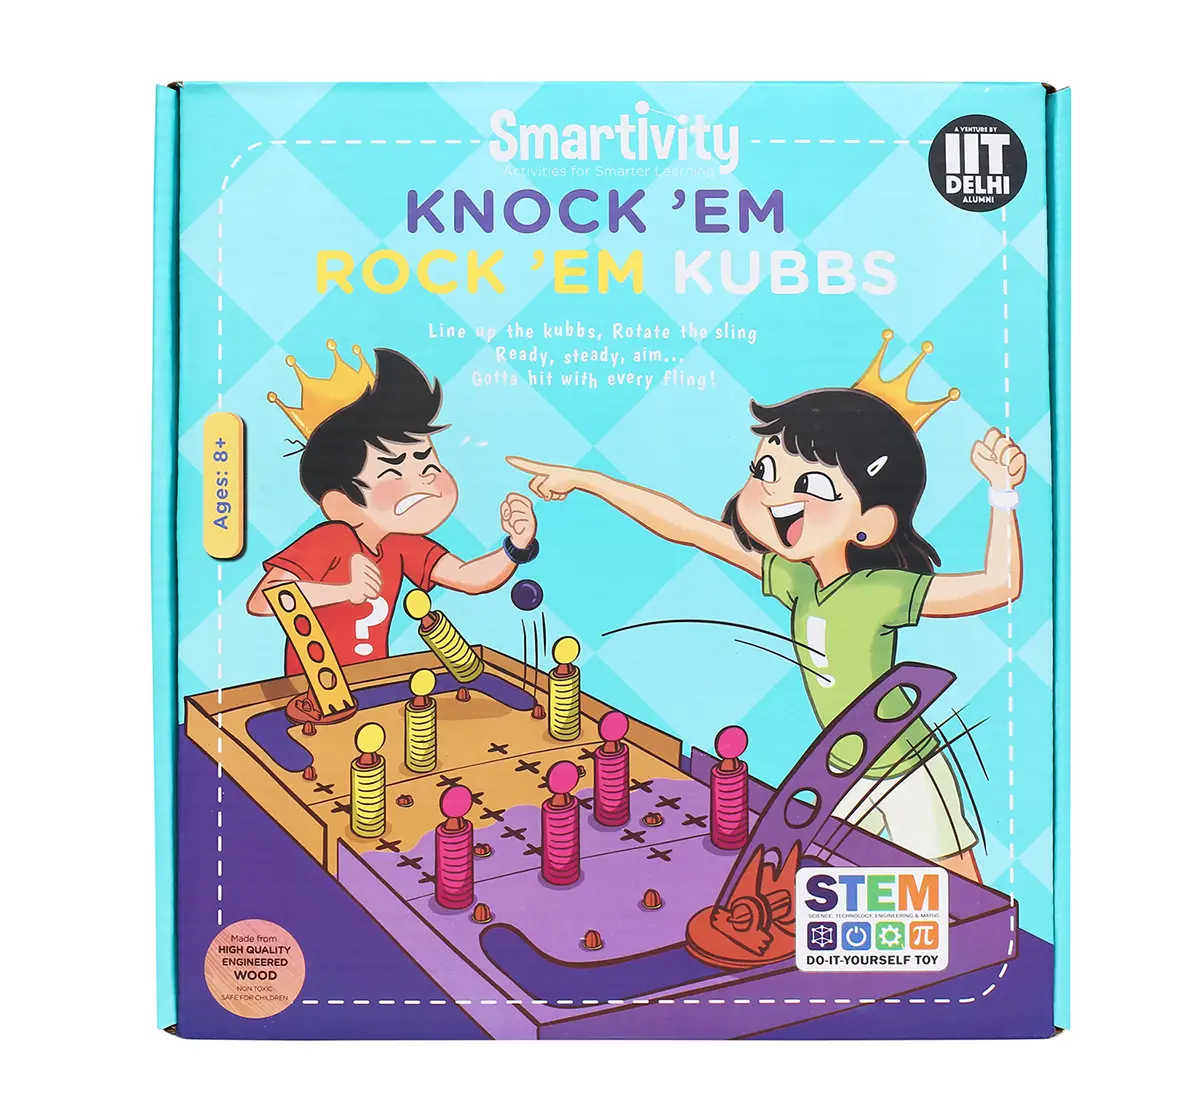 Smartivity Knock 'Em Rock 'Em Kubbs : Stem, Learning, Educational and Construction Activity Toy Gift for age 8Y+  (Multi-Color)